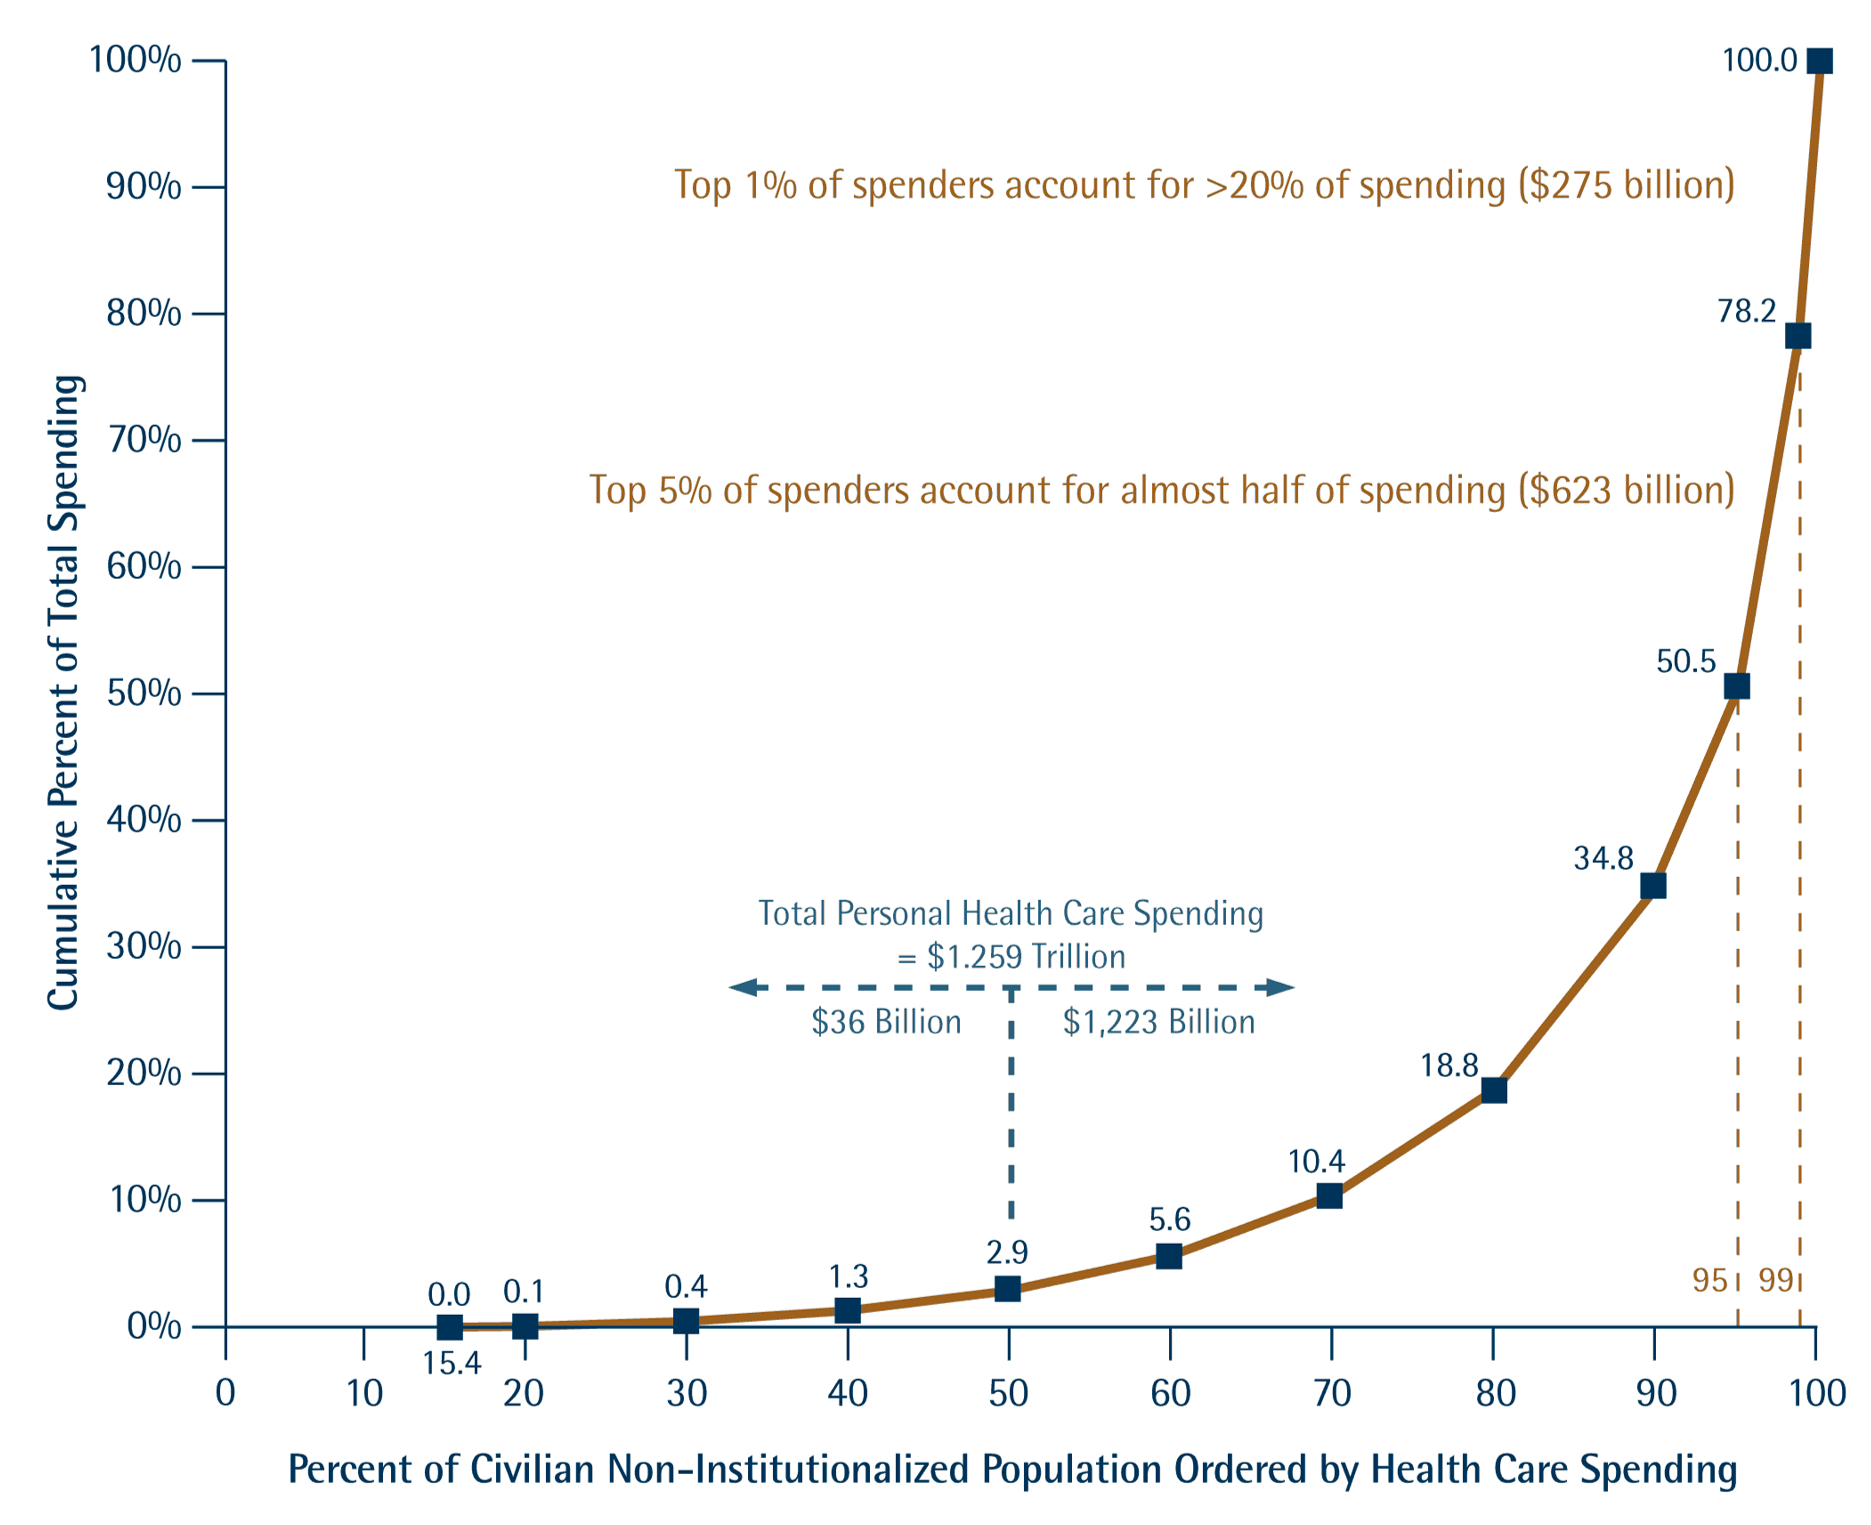 5 percent of population account for 50 percent of health care spending